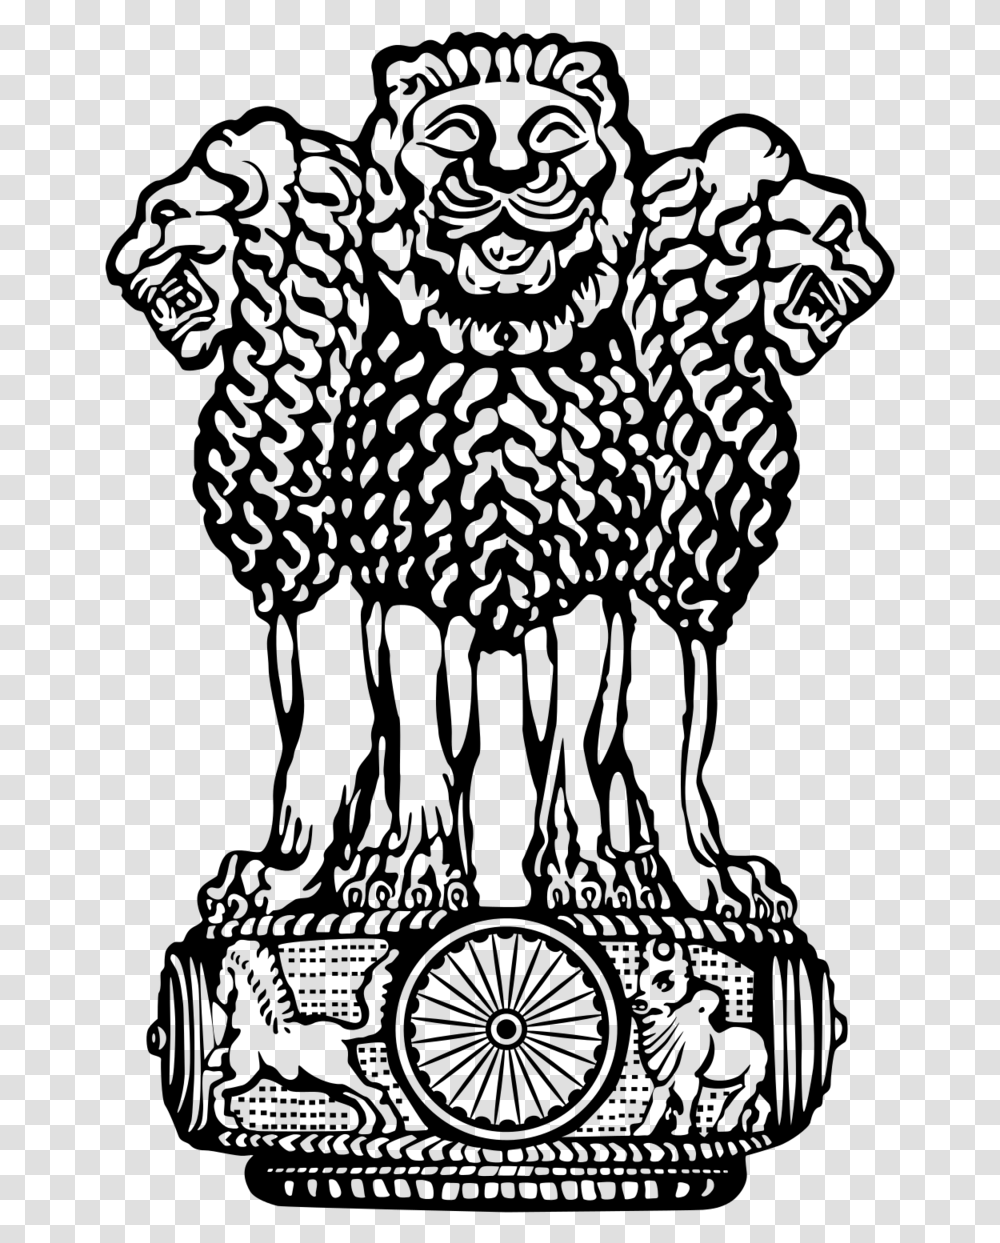 State emblem of india - Top vector, png, psd files on Nohat.cc